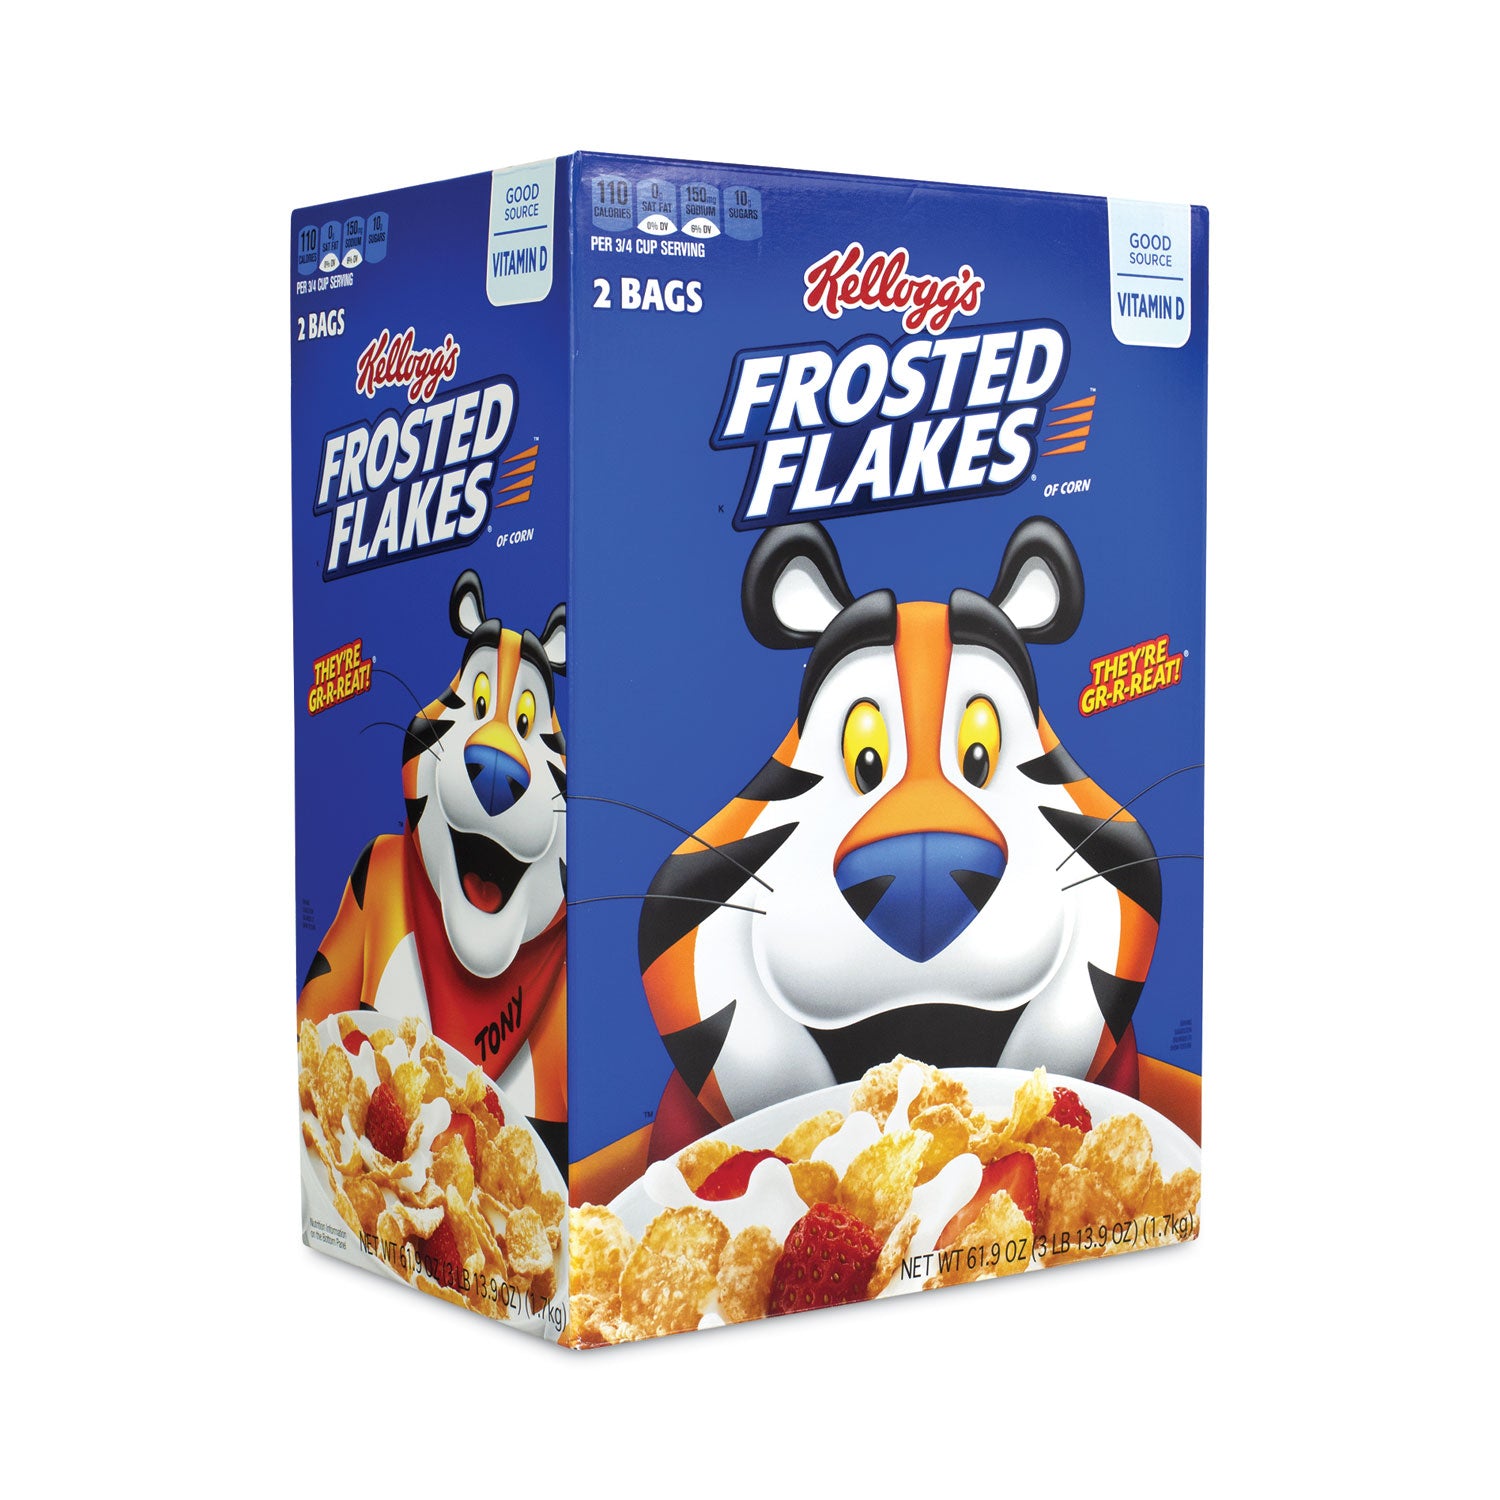 frosted-flakes-breakfast-cereal-619-oz-bag-2-bags-box-ships-in-1-3-business-days_grr22000901 - 1